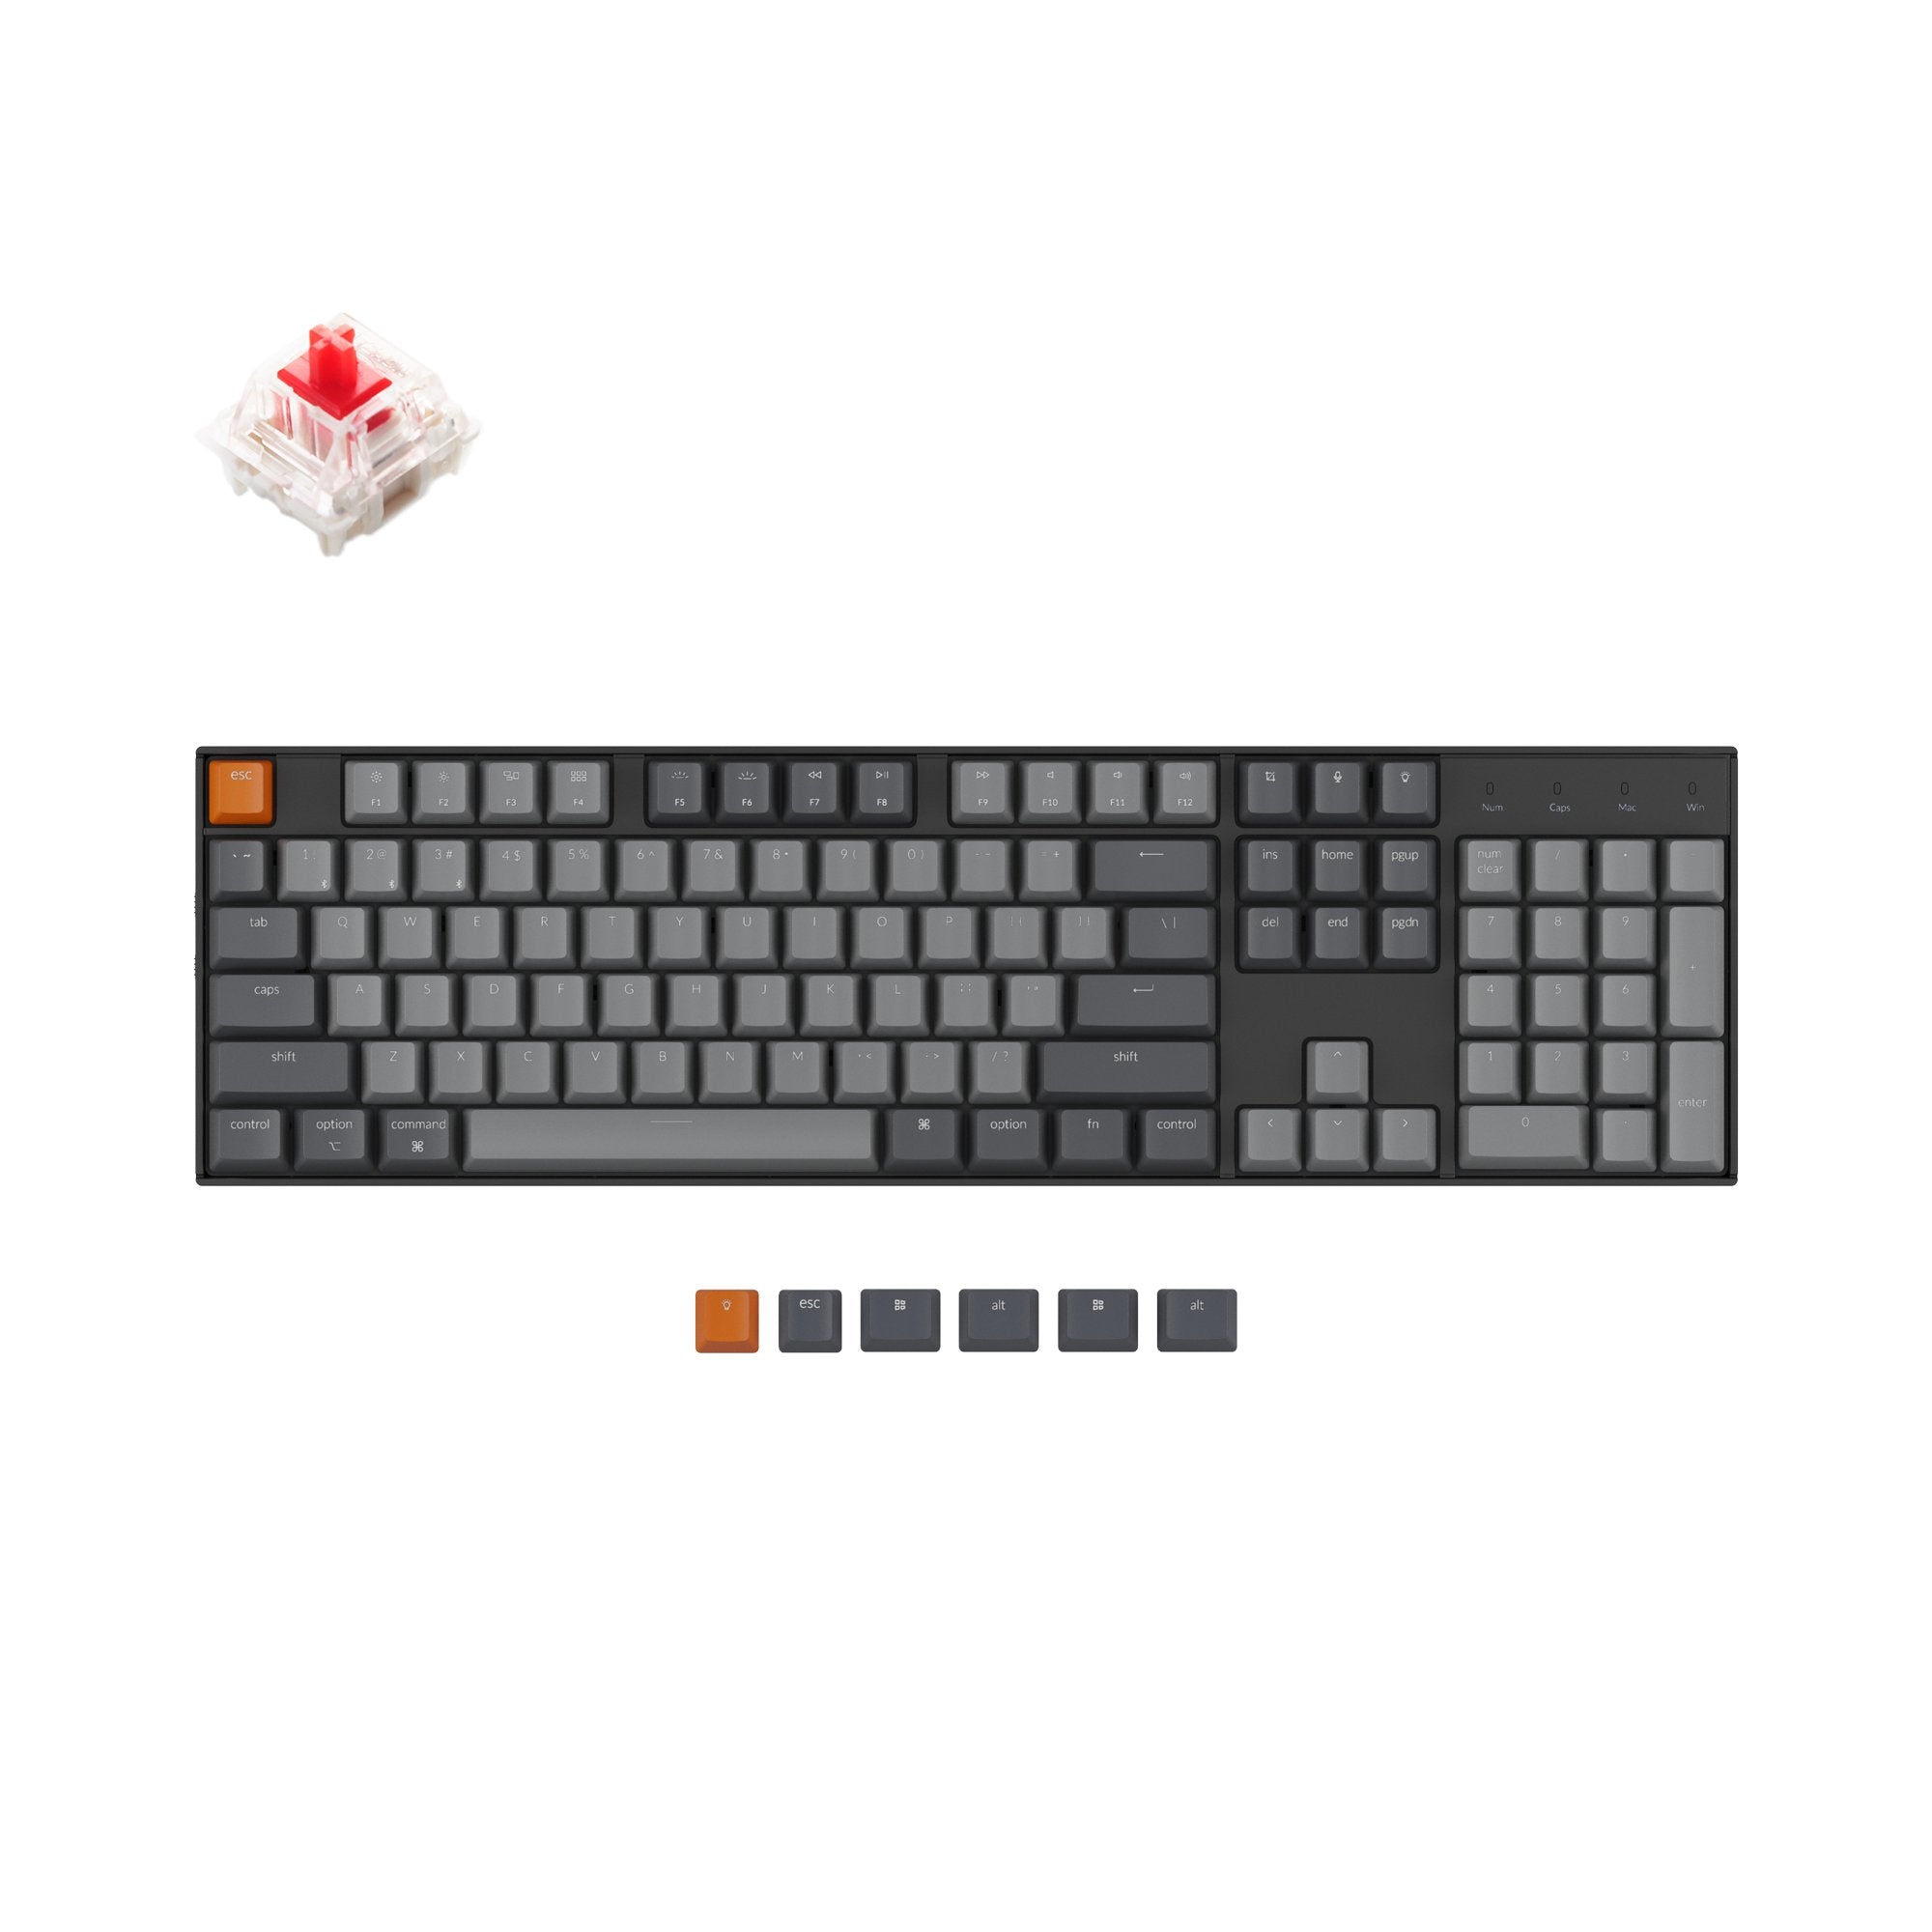 Keychron K10 Wireless mechanical keyboard has included keycaps for both Windows and macOS, and users can hotswap every switch in seconds with the hot-swappable version.